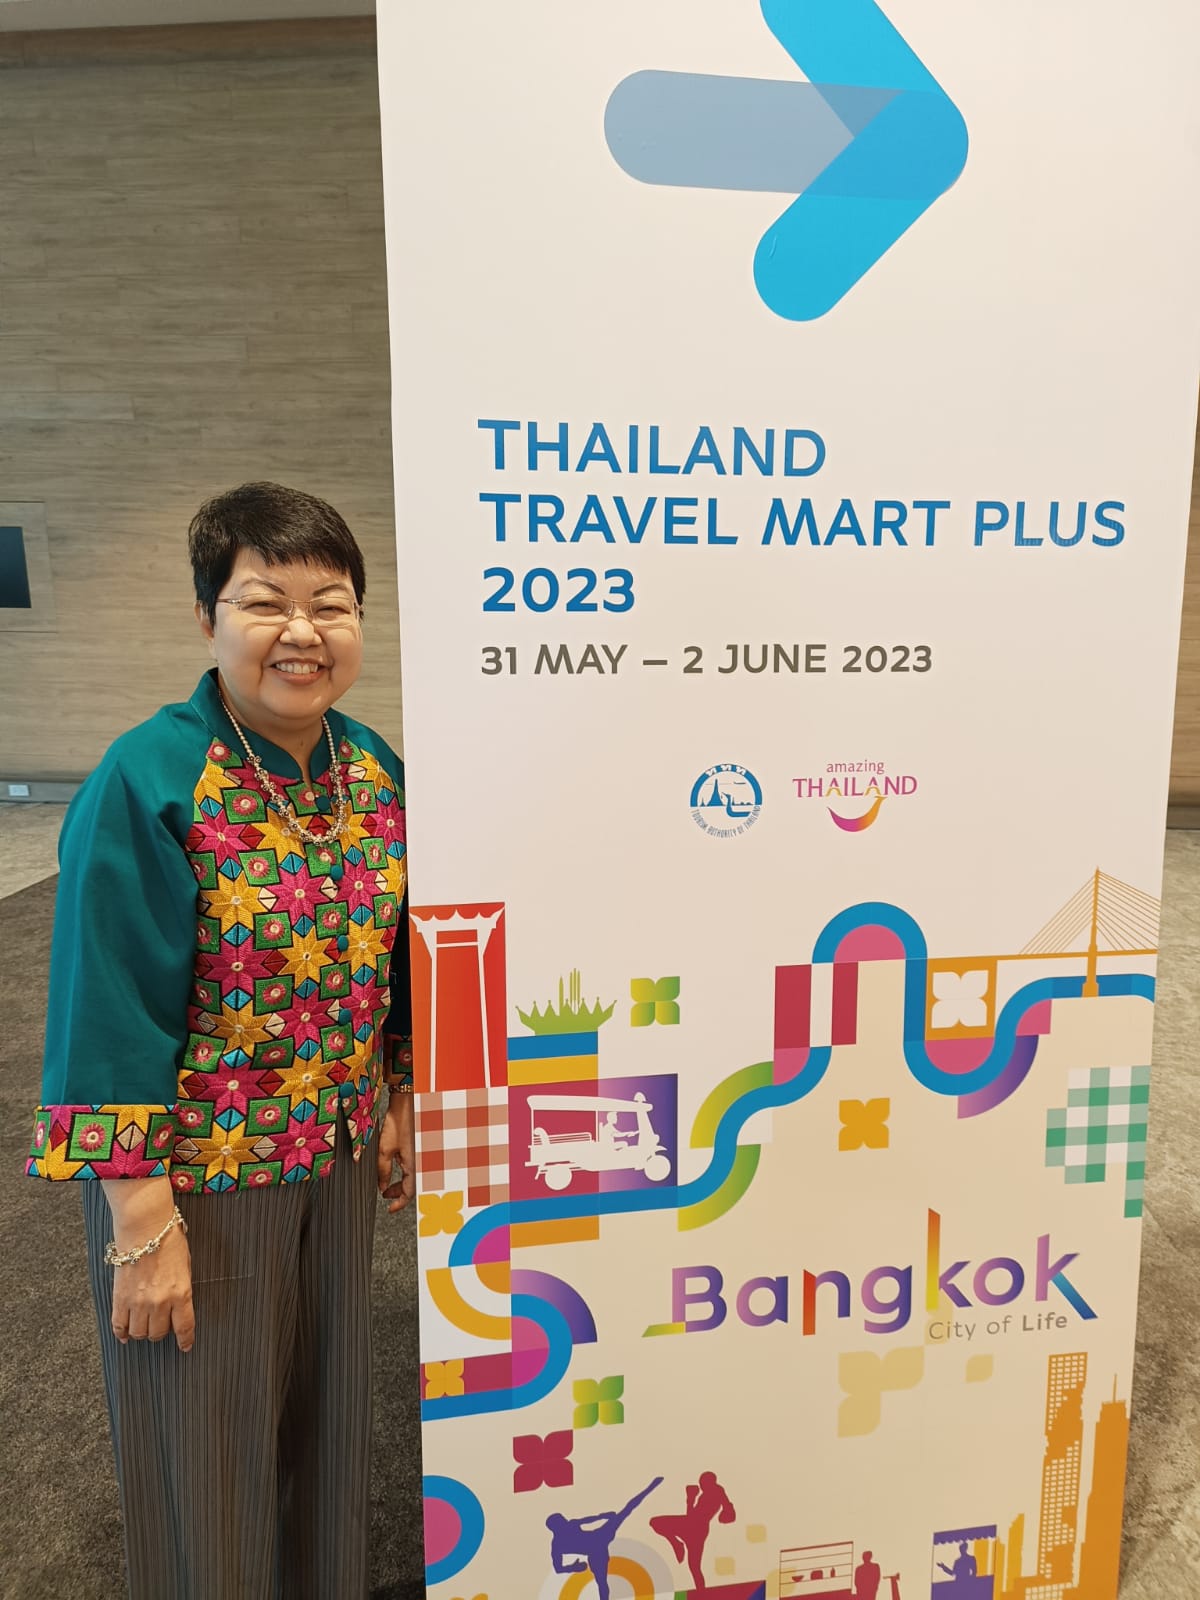 Thailand banks on TTM+ to aid tourism recovery; targets to meet 2019 inbound numbers from India this year